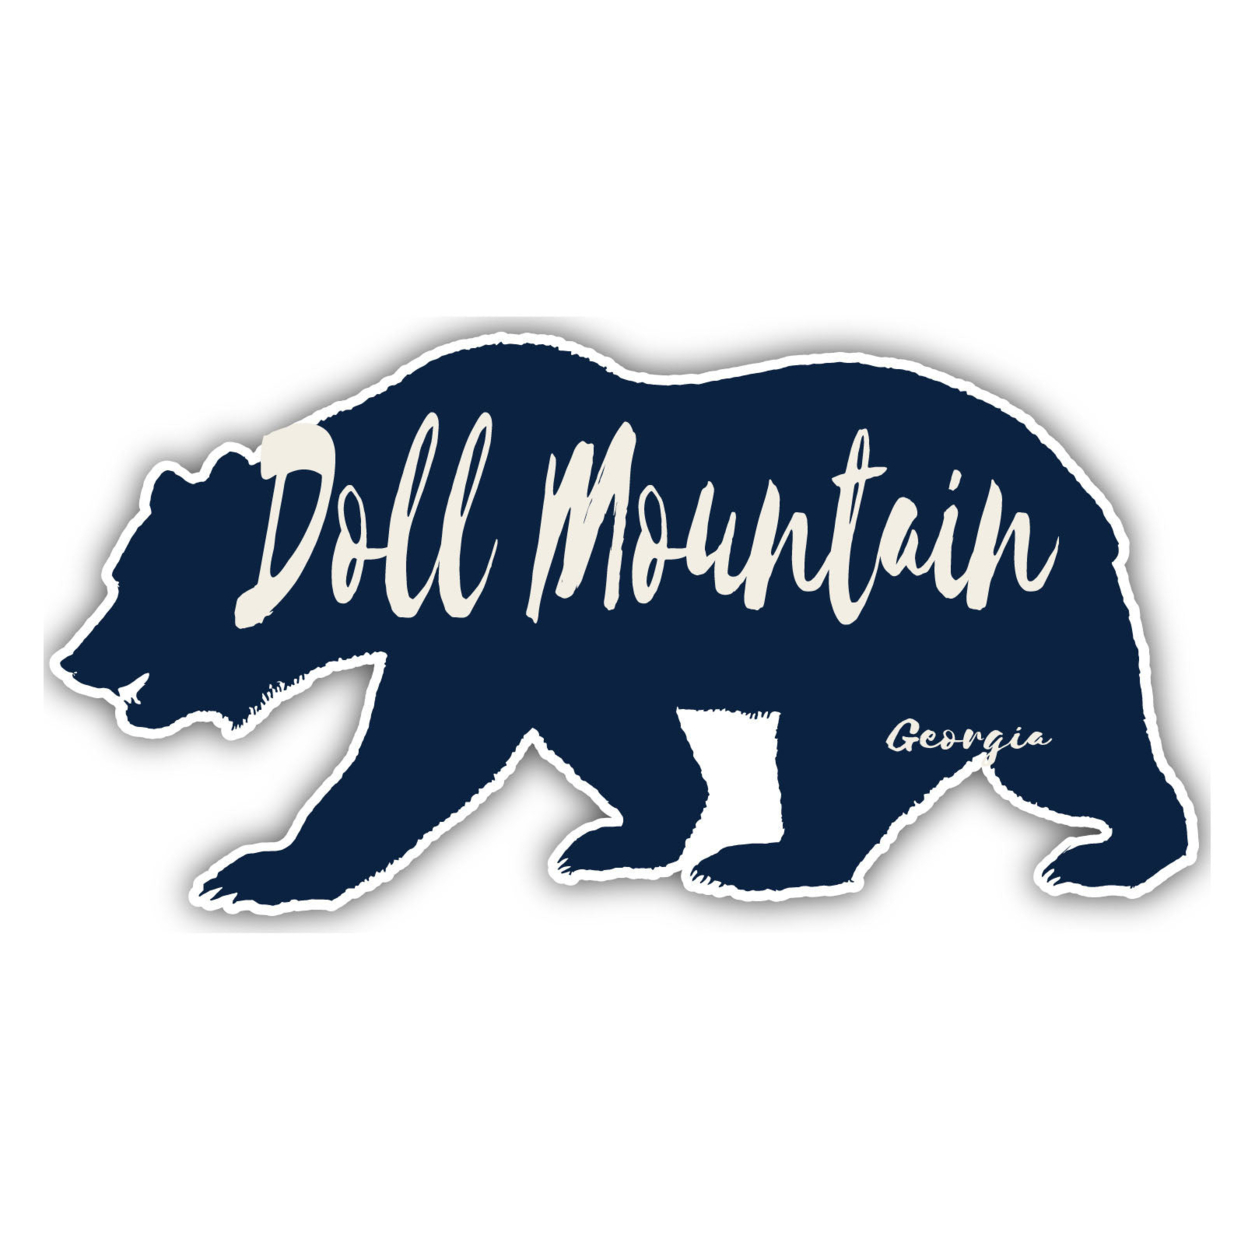 Doll Mountain Georgia Souvenir Decorative Stickers (Choose Theme And Size) - 4-Pack, 12-Inch, Great Outdoors